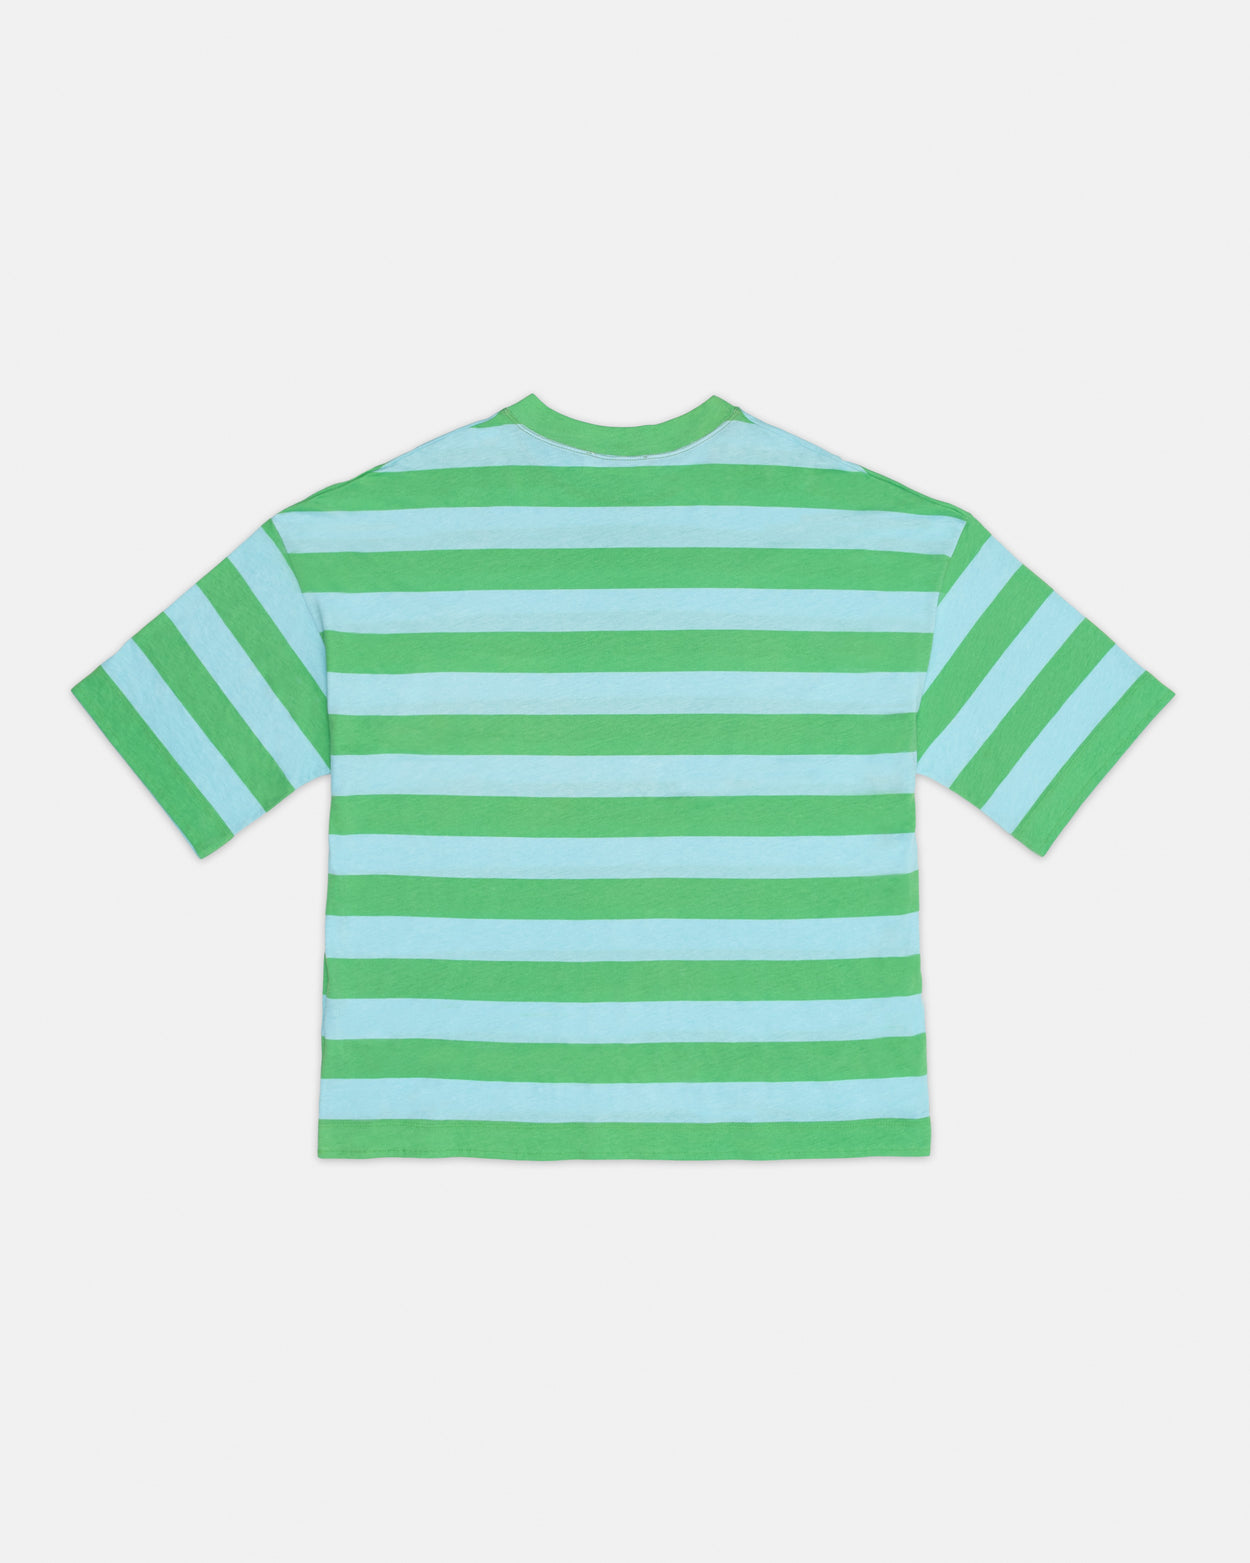 The Striped Baggy T